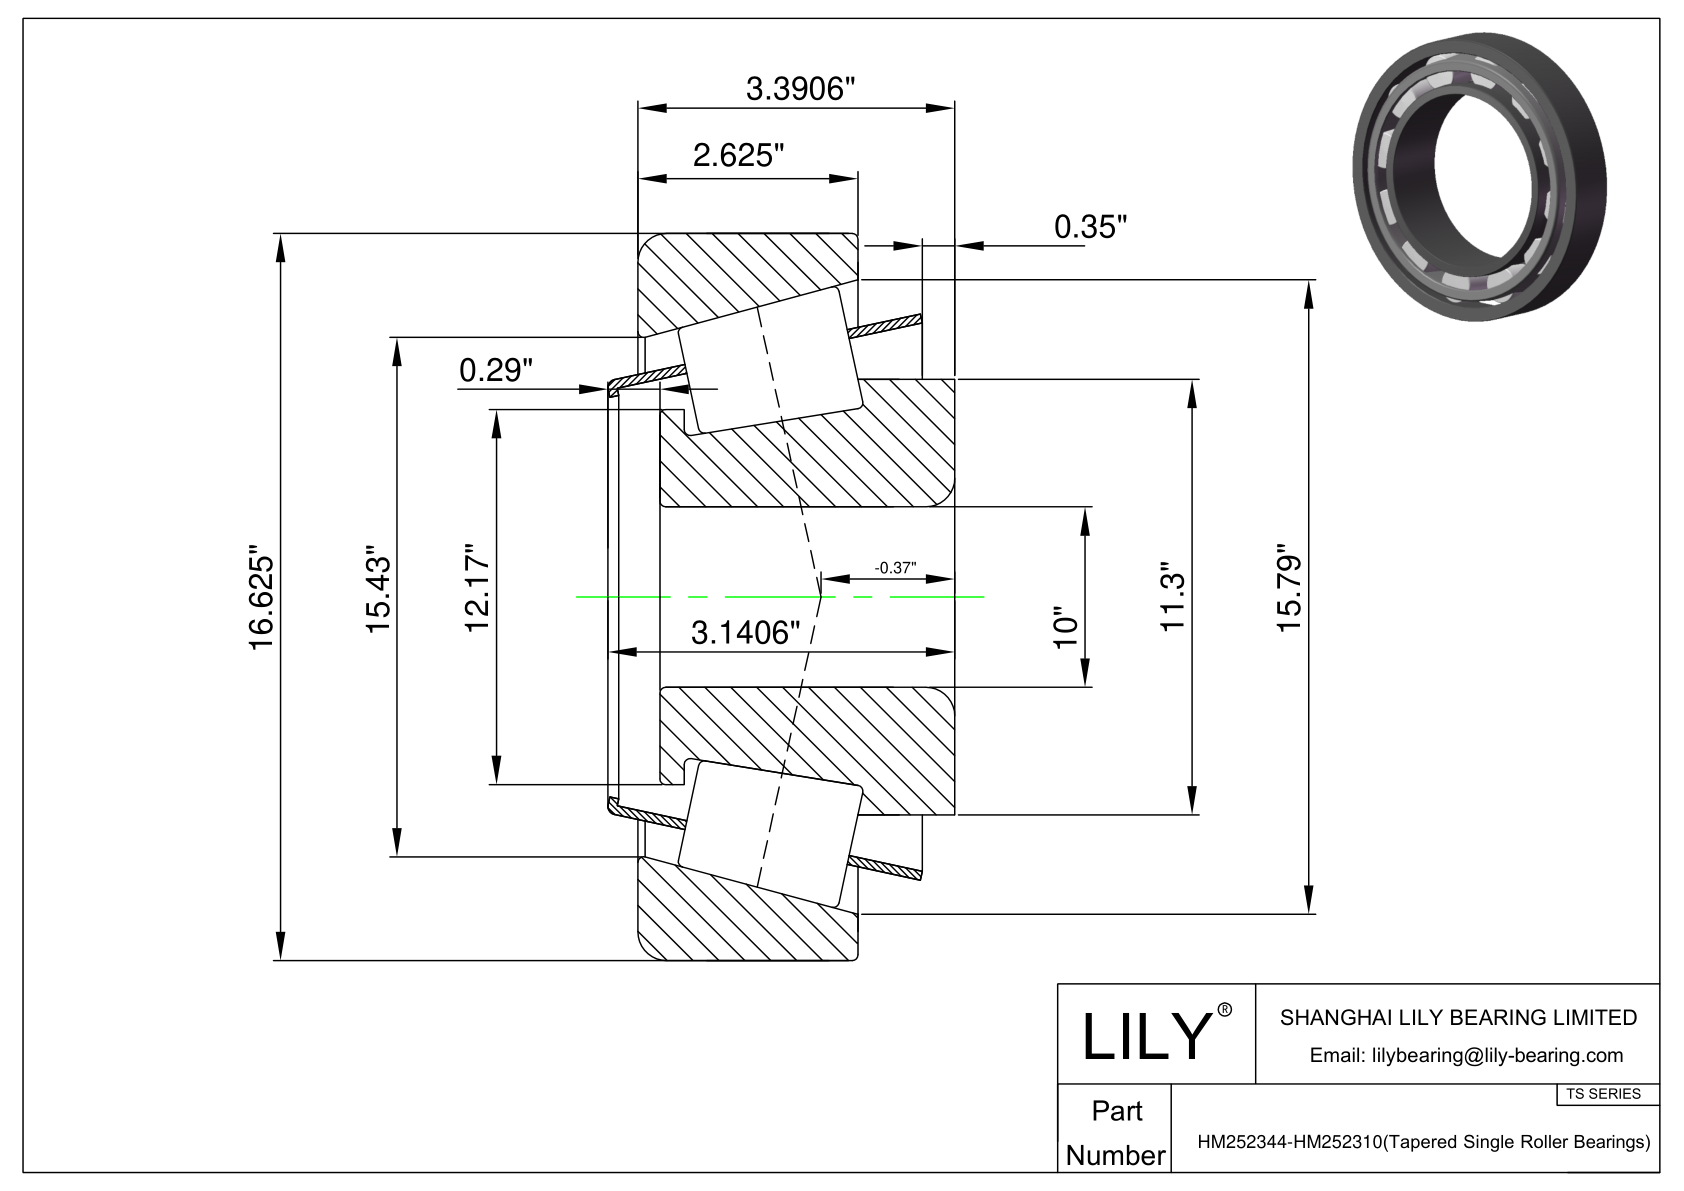 HM252344-HM252310 TS (Tapered Single Roller Bearings) (Imperial) cad drawing